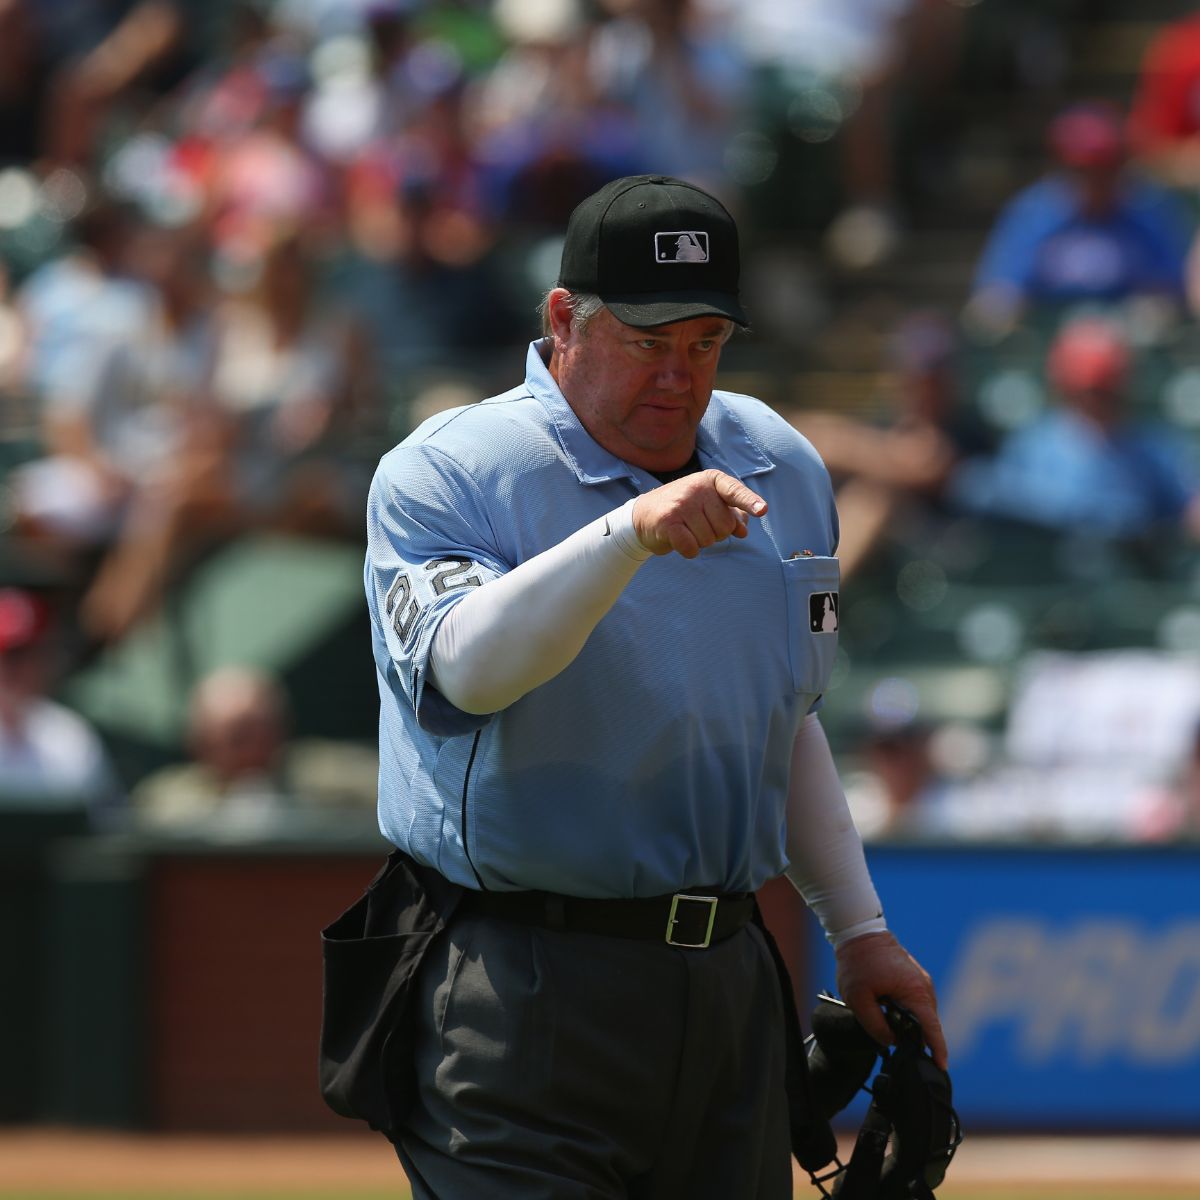 how much does joe west make as an umpire